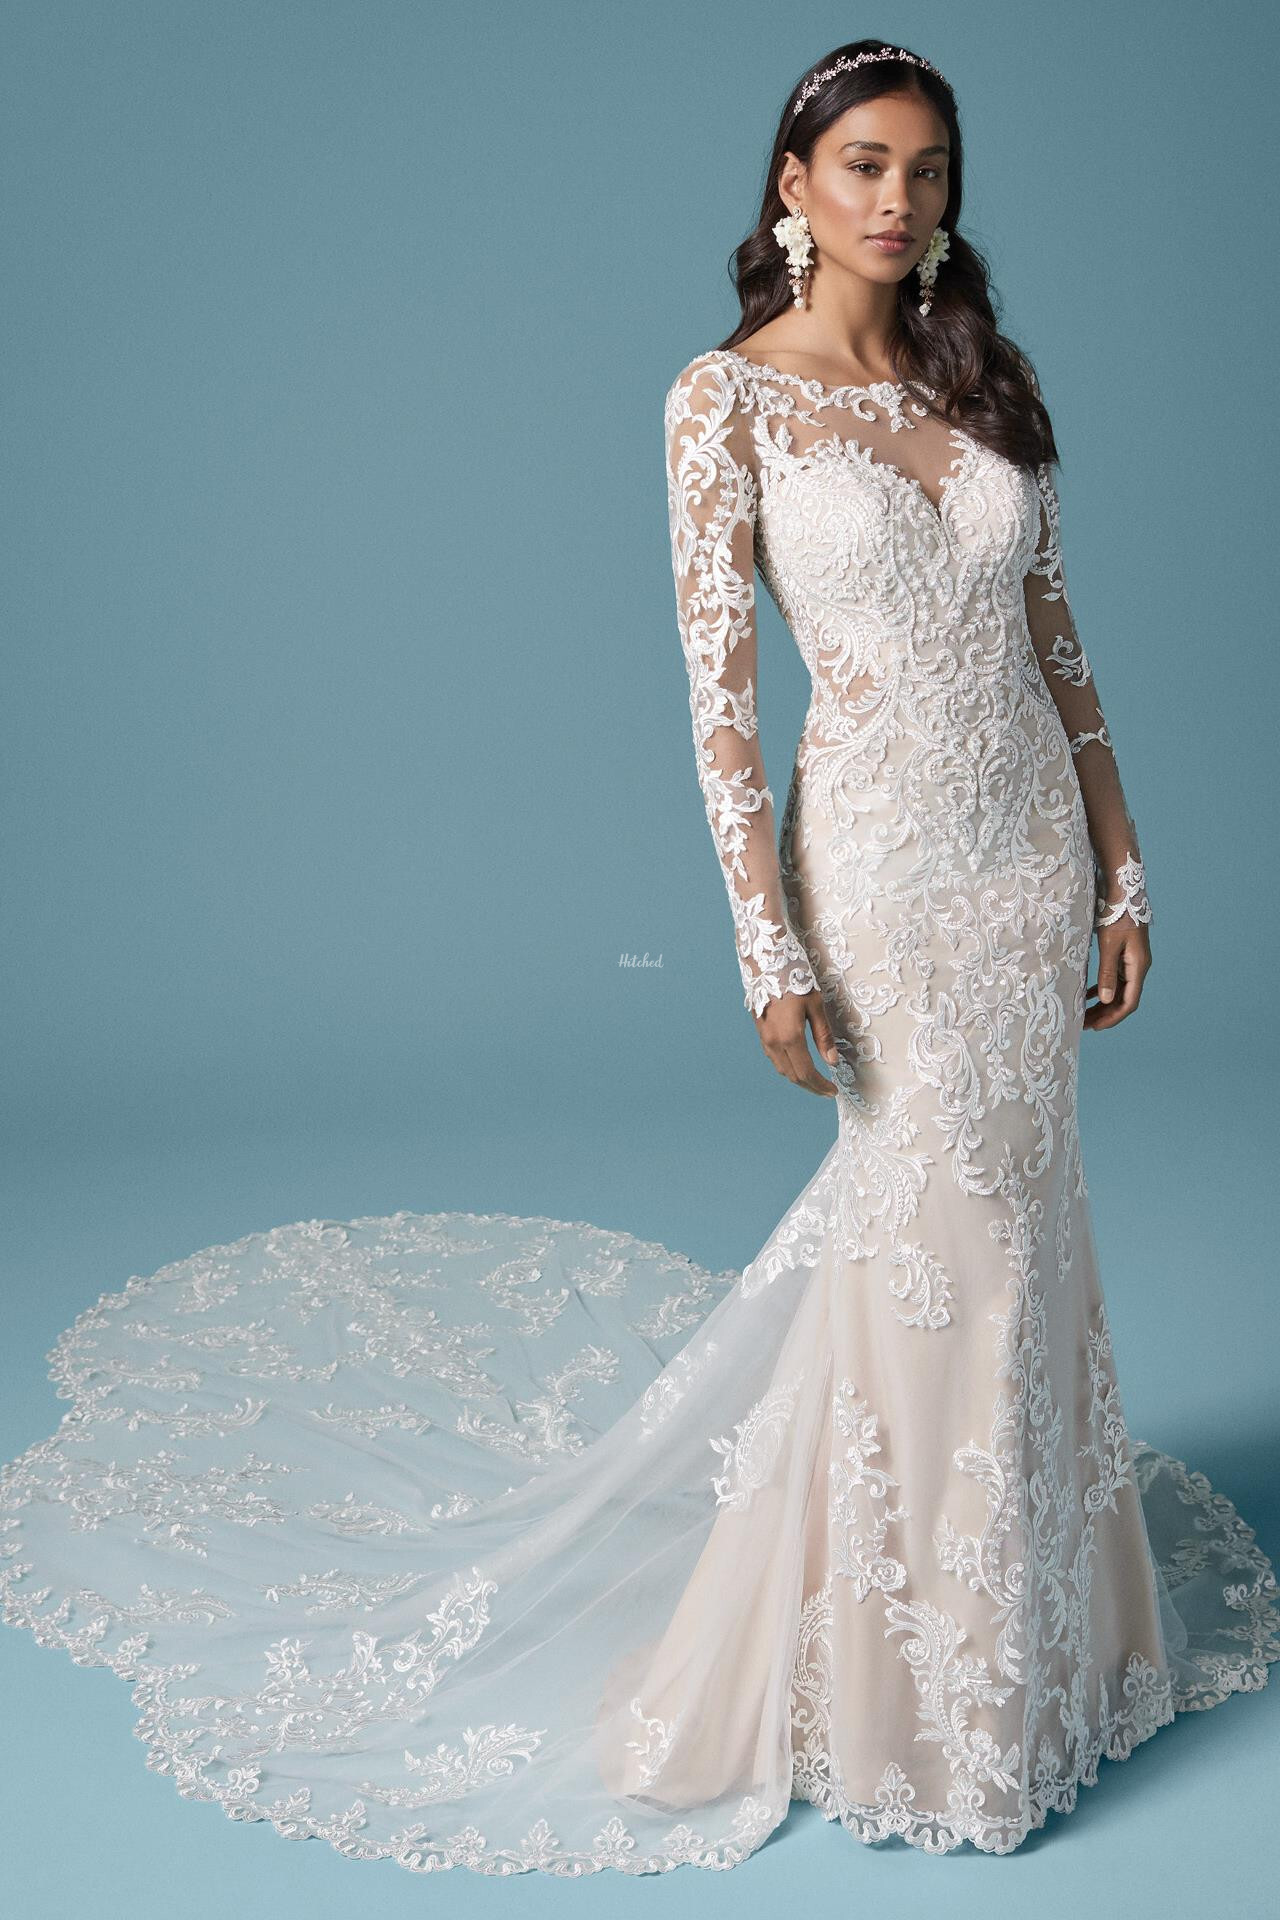 Lydia Anne Wedding Dress from Maggie Sottero - hitched.co.uk